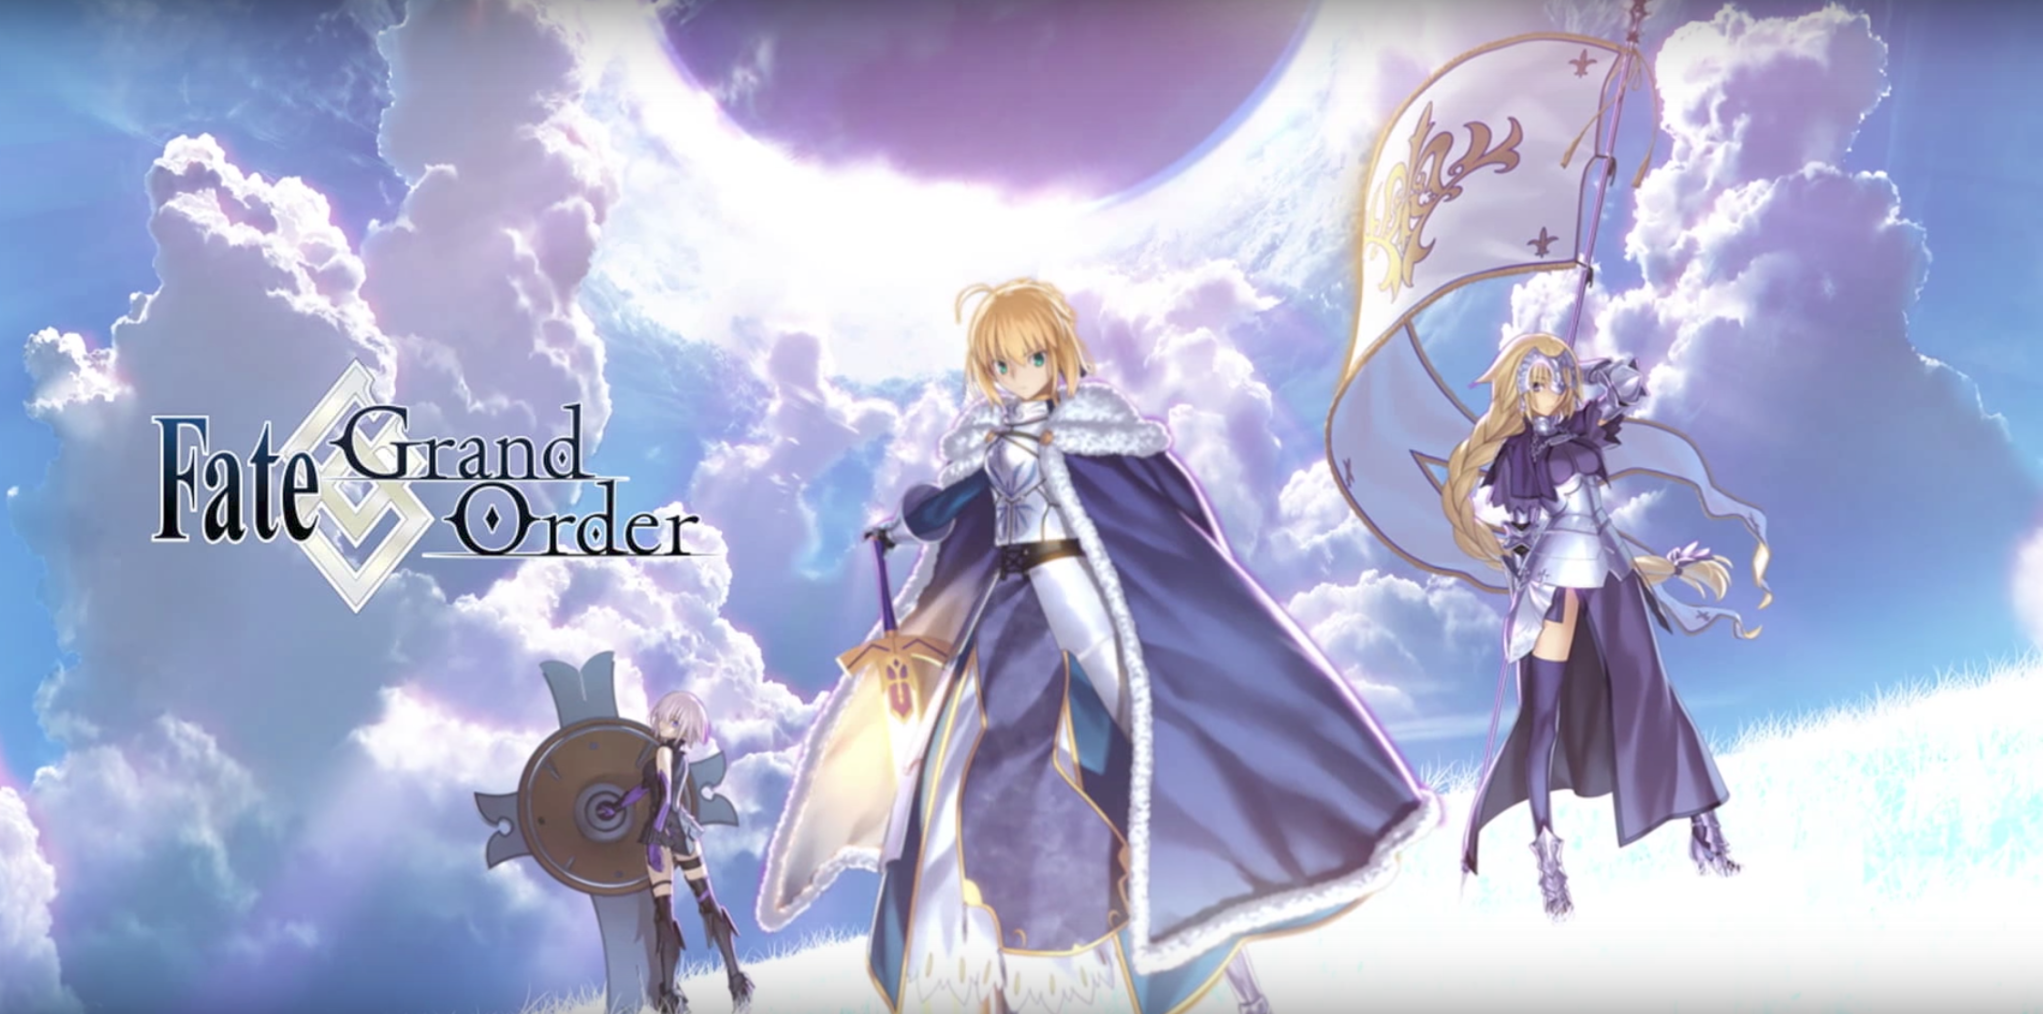 Fate/Grand Order: A gacha game that fails to impress, Features